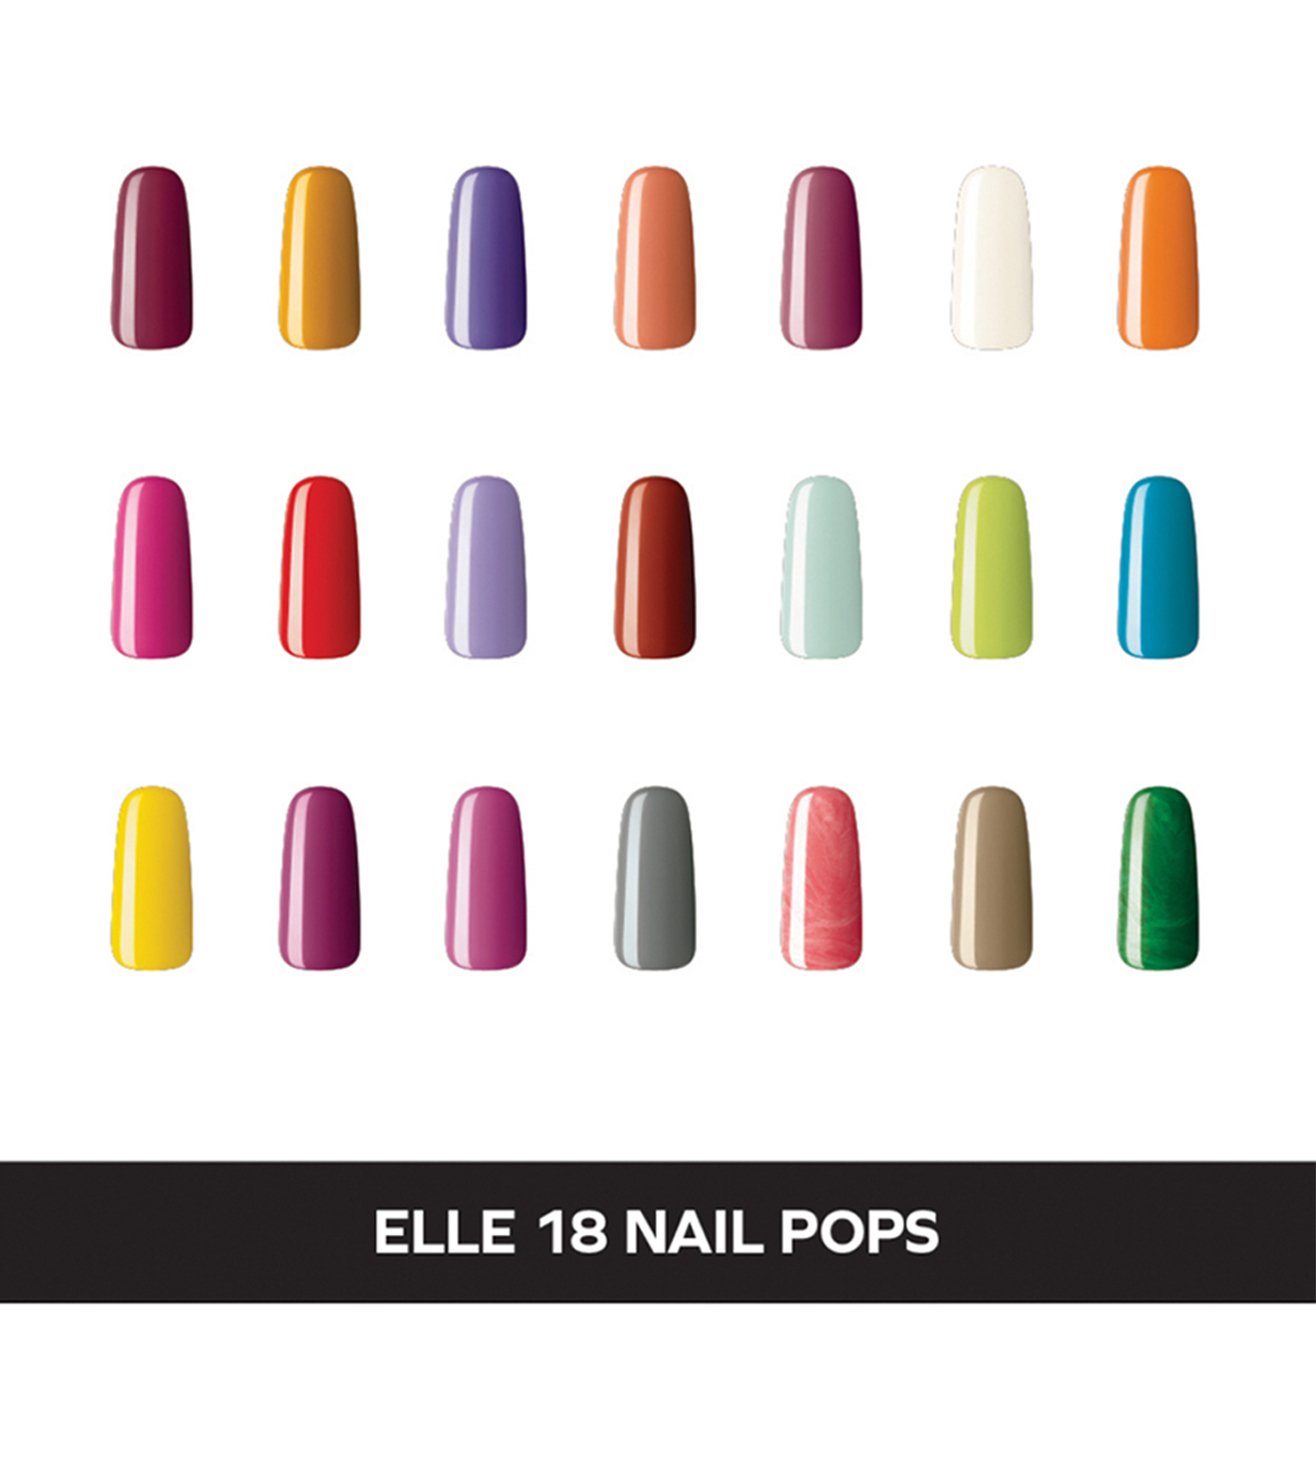 Buy Elle18 Nail Pops Nail Polish - Shade 121, 5ml Bottle Online at Low  Prices in India - Amazon.in